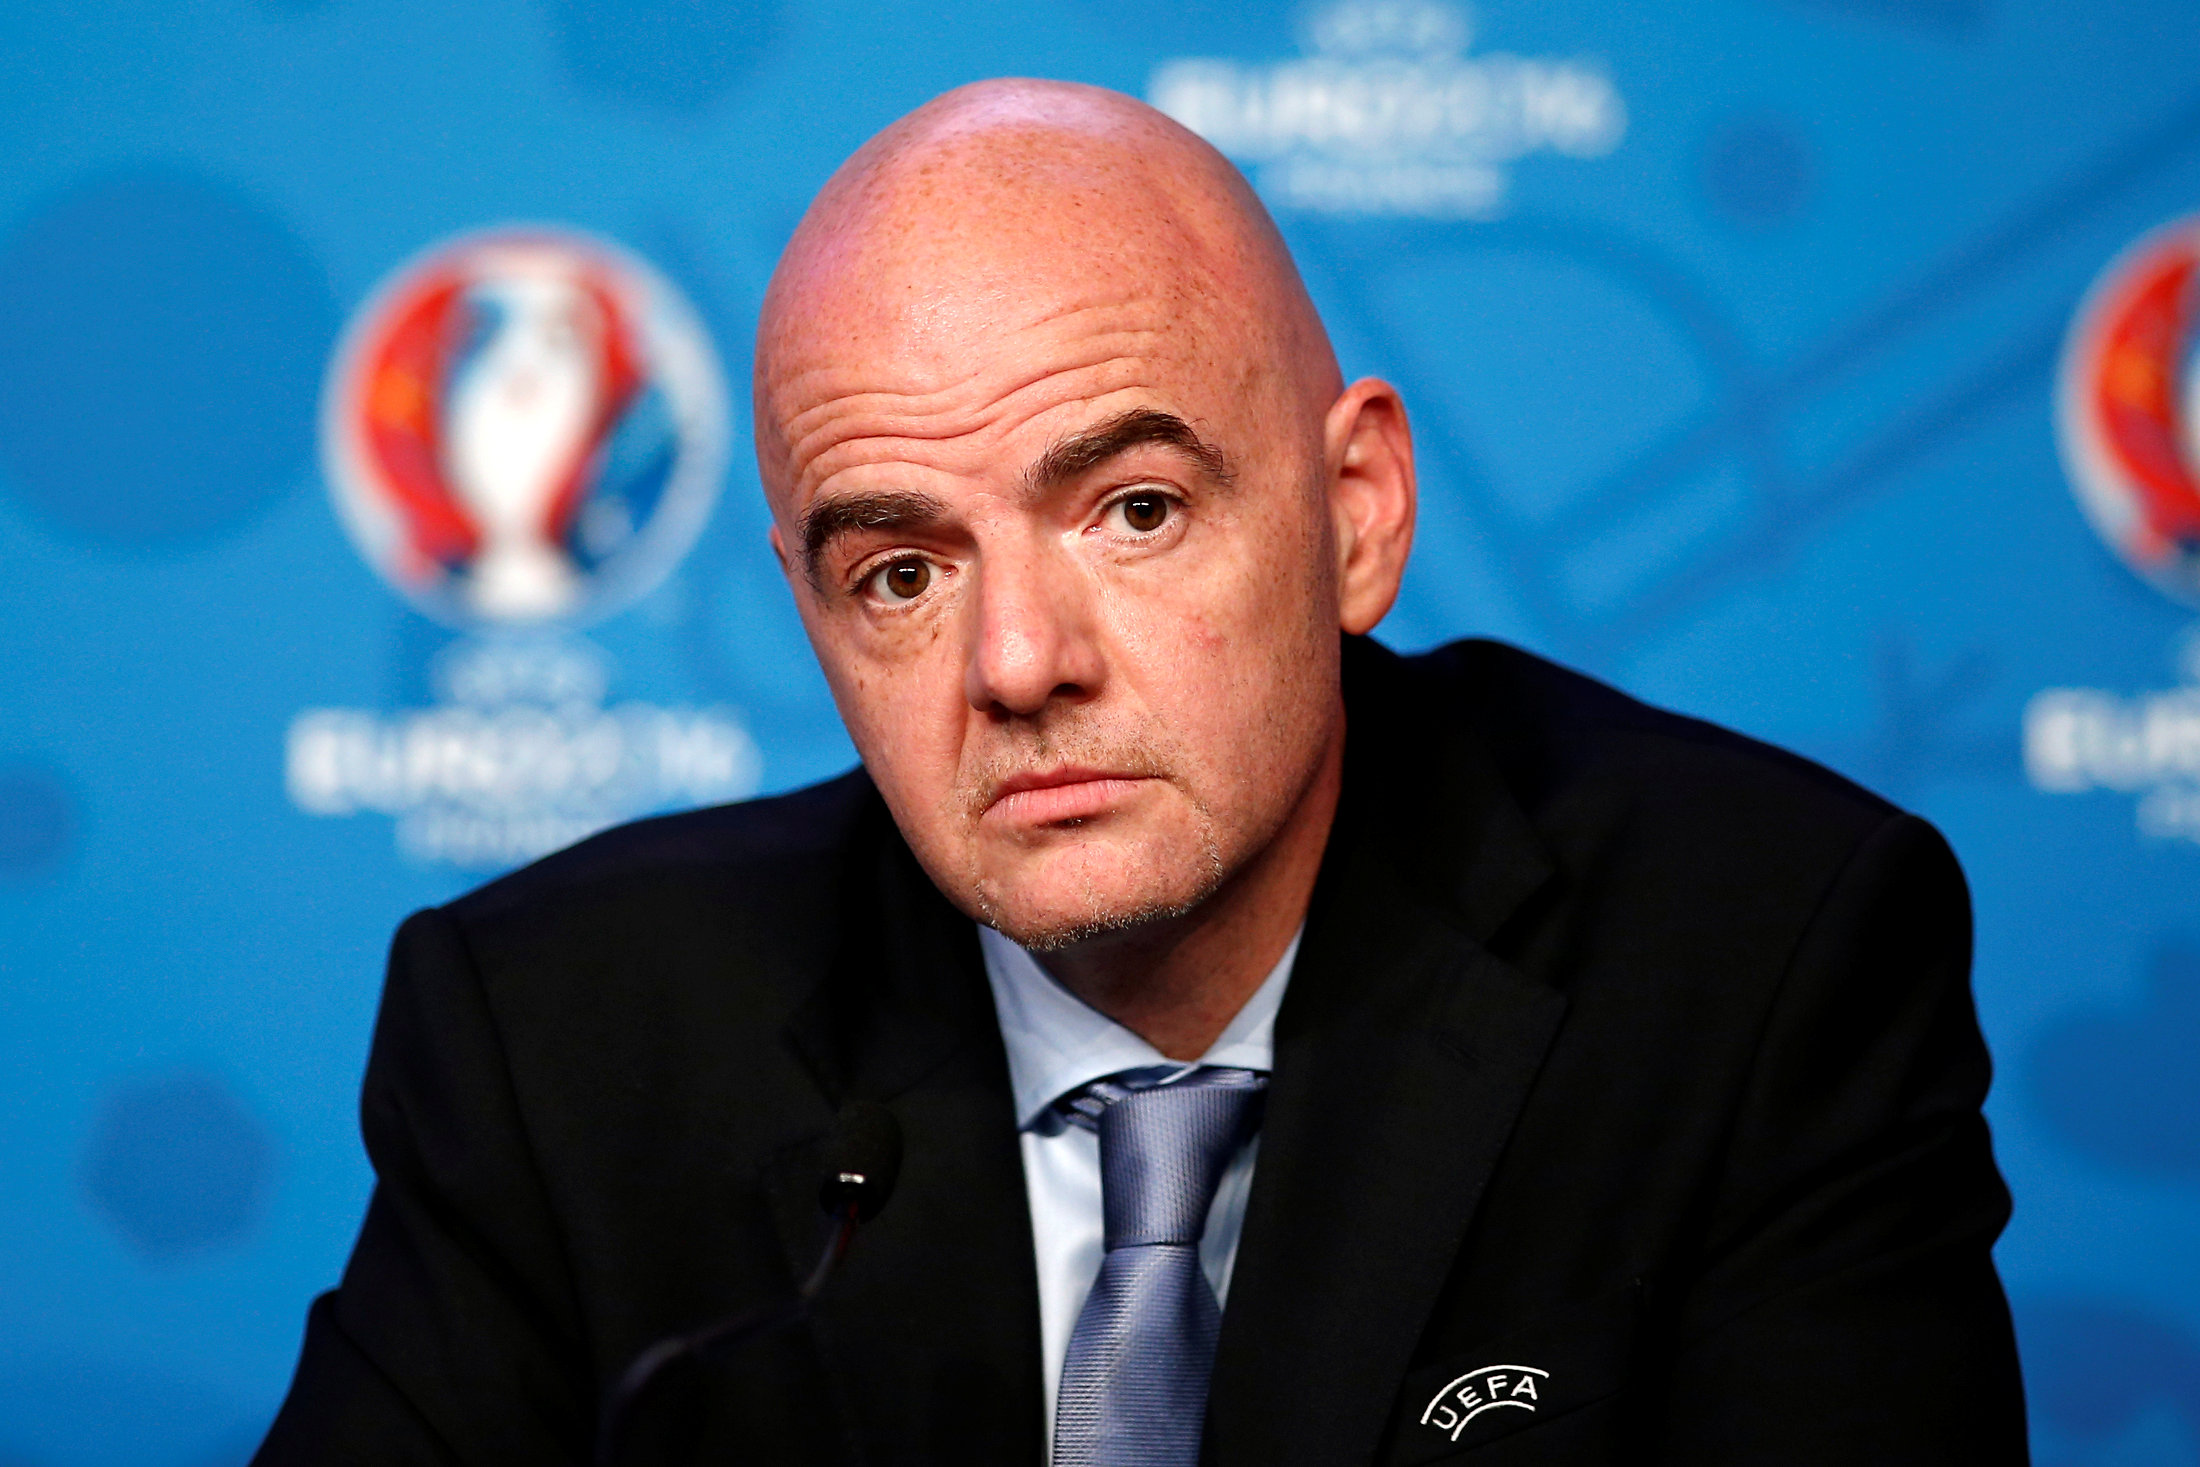 UEFA General Secretary Gianni Infantino attends a news conference after a meeting of UEFA's executive committee, on the eve of the draw of the Euro 2016 finals in Paris.